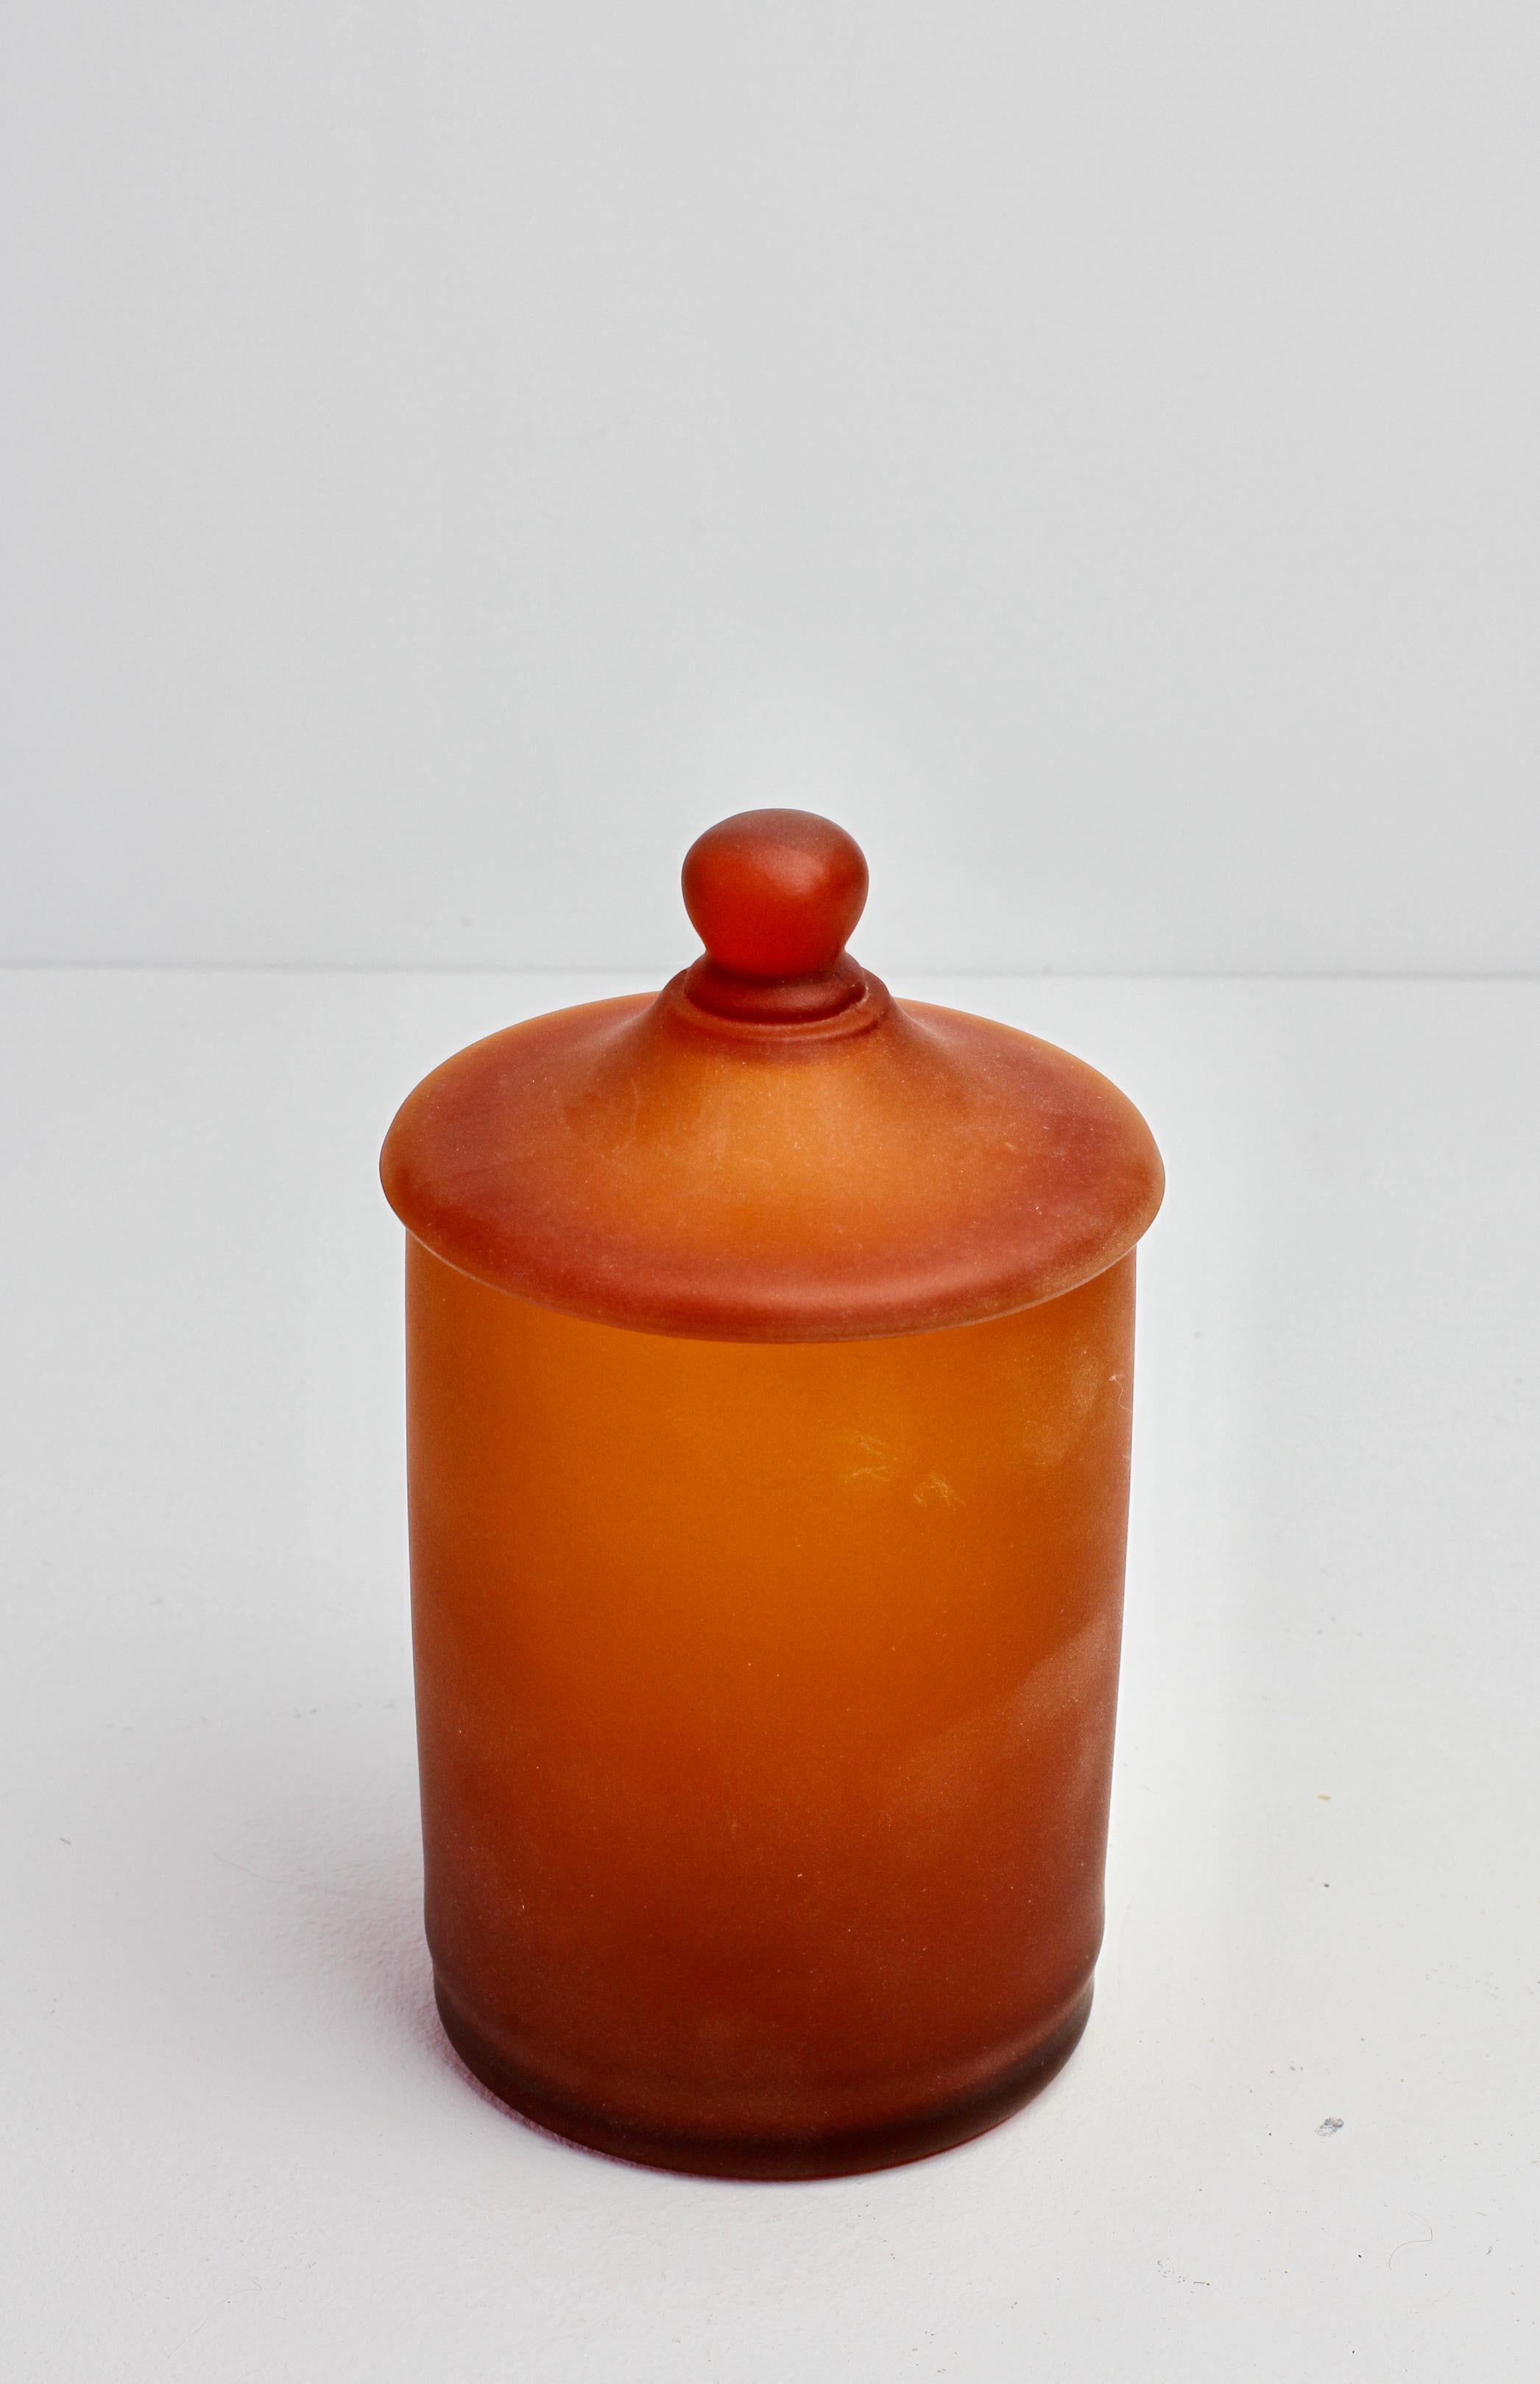 Venetian Murano amber colored / coloured glass Apothecary jar or urn with lid with an acid etched (corroso) finish. Wonderful vintage midcentury Italian glass and perfect for the storage sweets or snacks in the kitchen or for cotton wool buds or